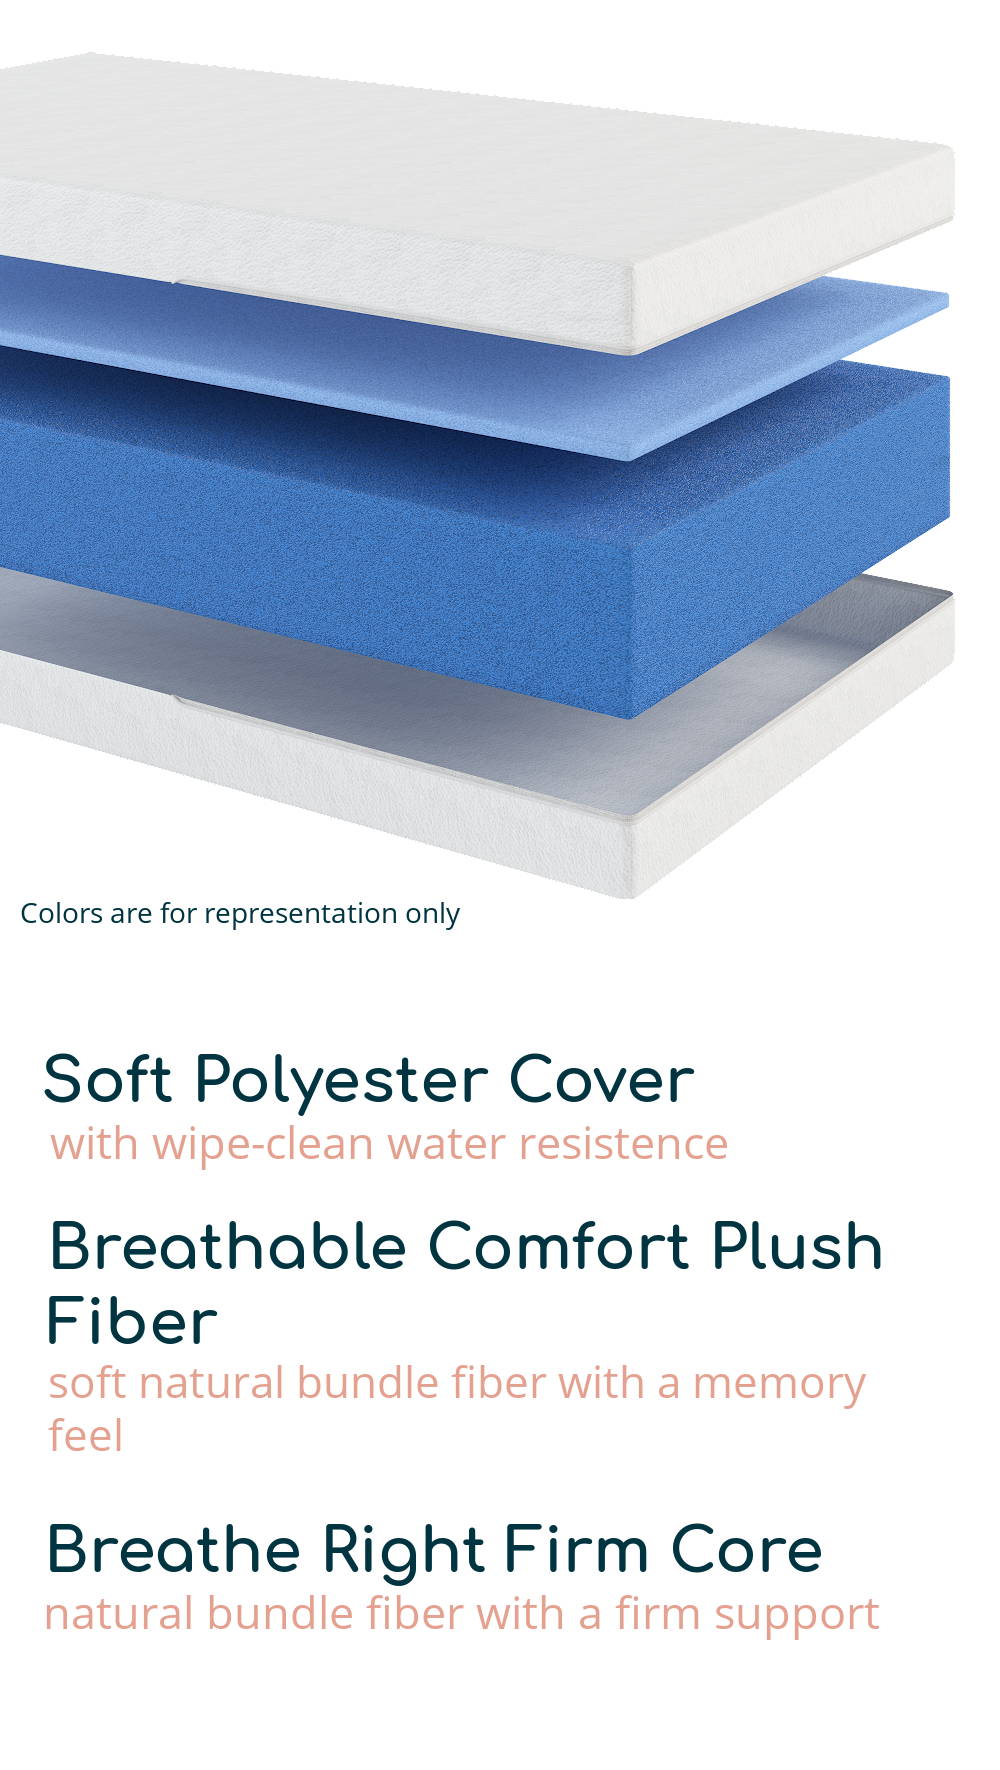 Soft Polyester Cover-with wipe clean resistance, Breathable Comfort Plush Fiber-soft natural bundle fiber with a memory feel, Breathe Right Firm Core-natural bundle fiber with a firm support